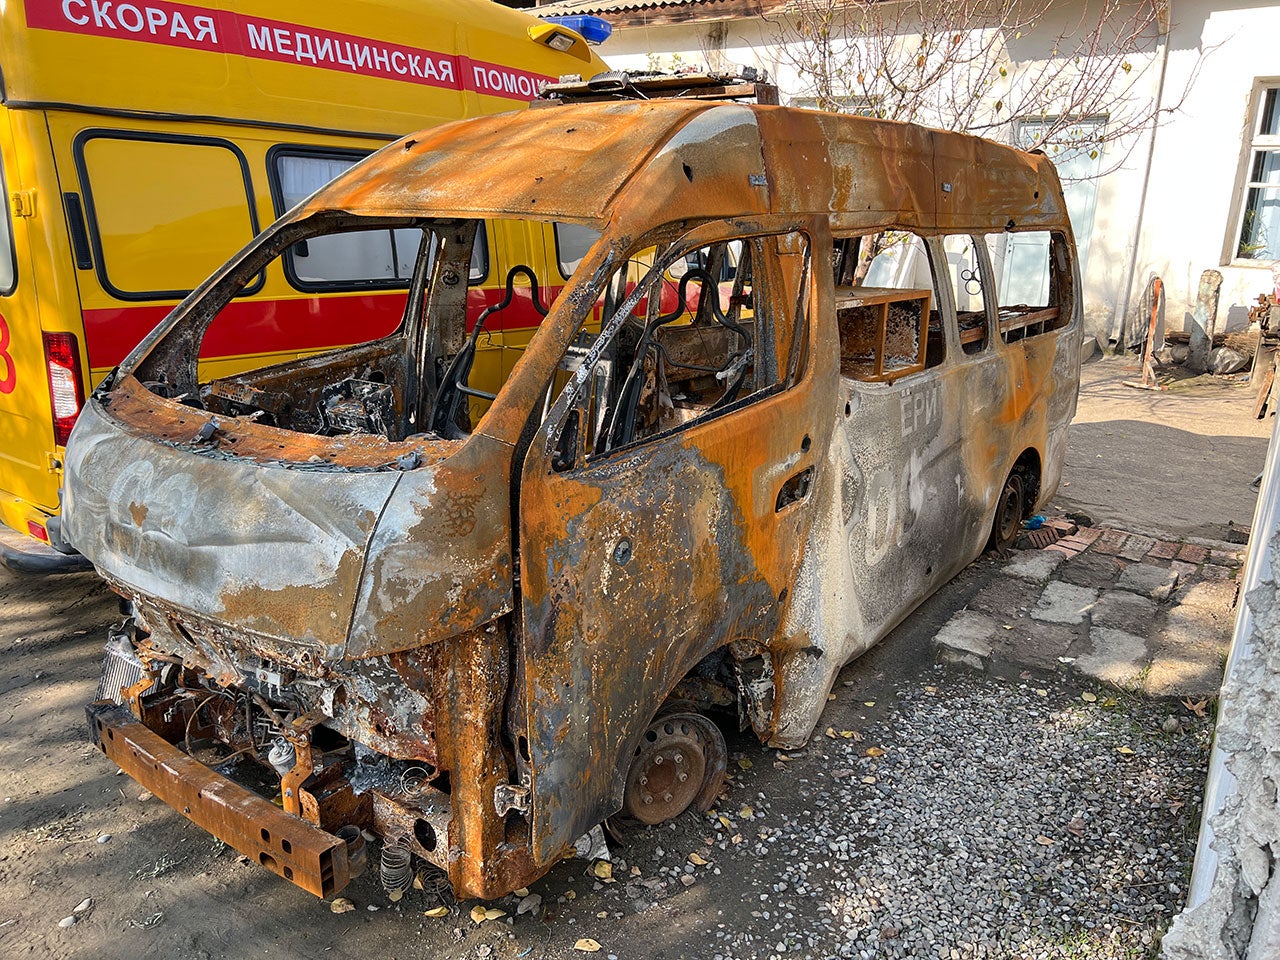 The wreckage of a second Tajik ambulance, from Chorkuh Village Hospital that was also attacked near a bridge by the border in Chorbog on September 16, 2022, along with another ambulance and a car carrying civilians.